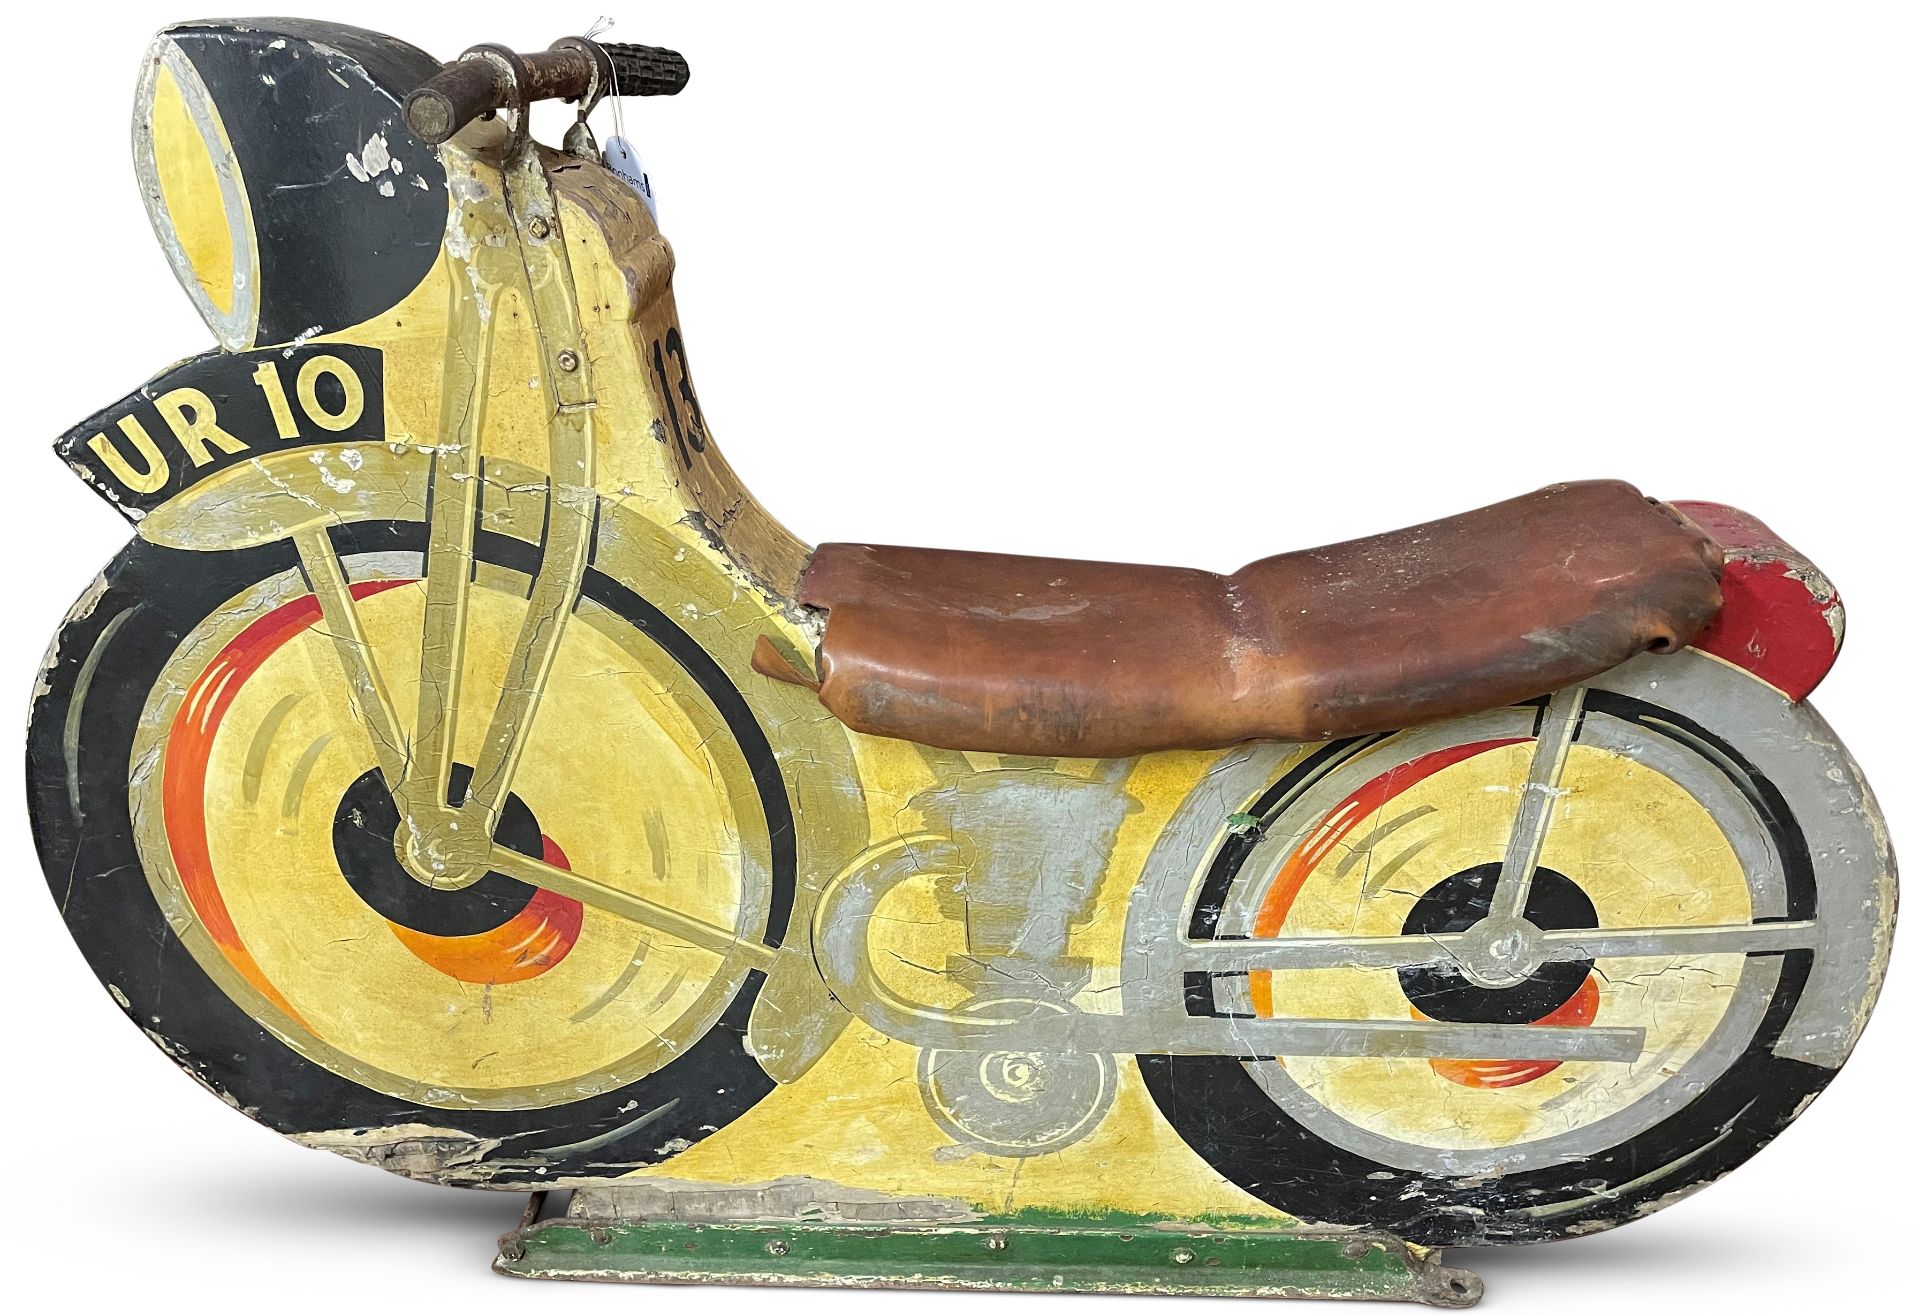 A fairground motorcycle, 1950s,